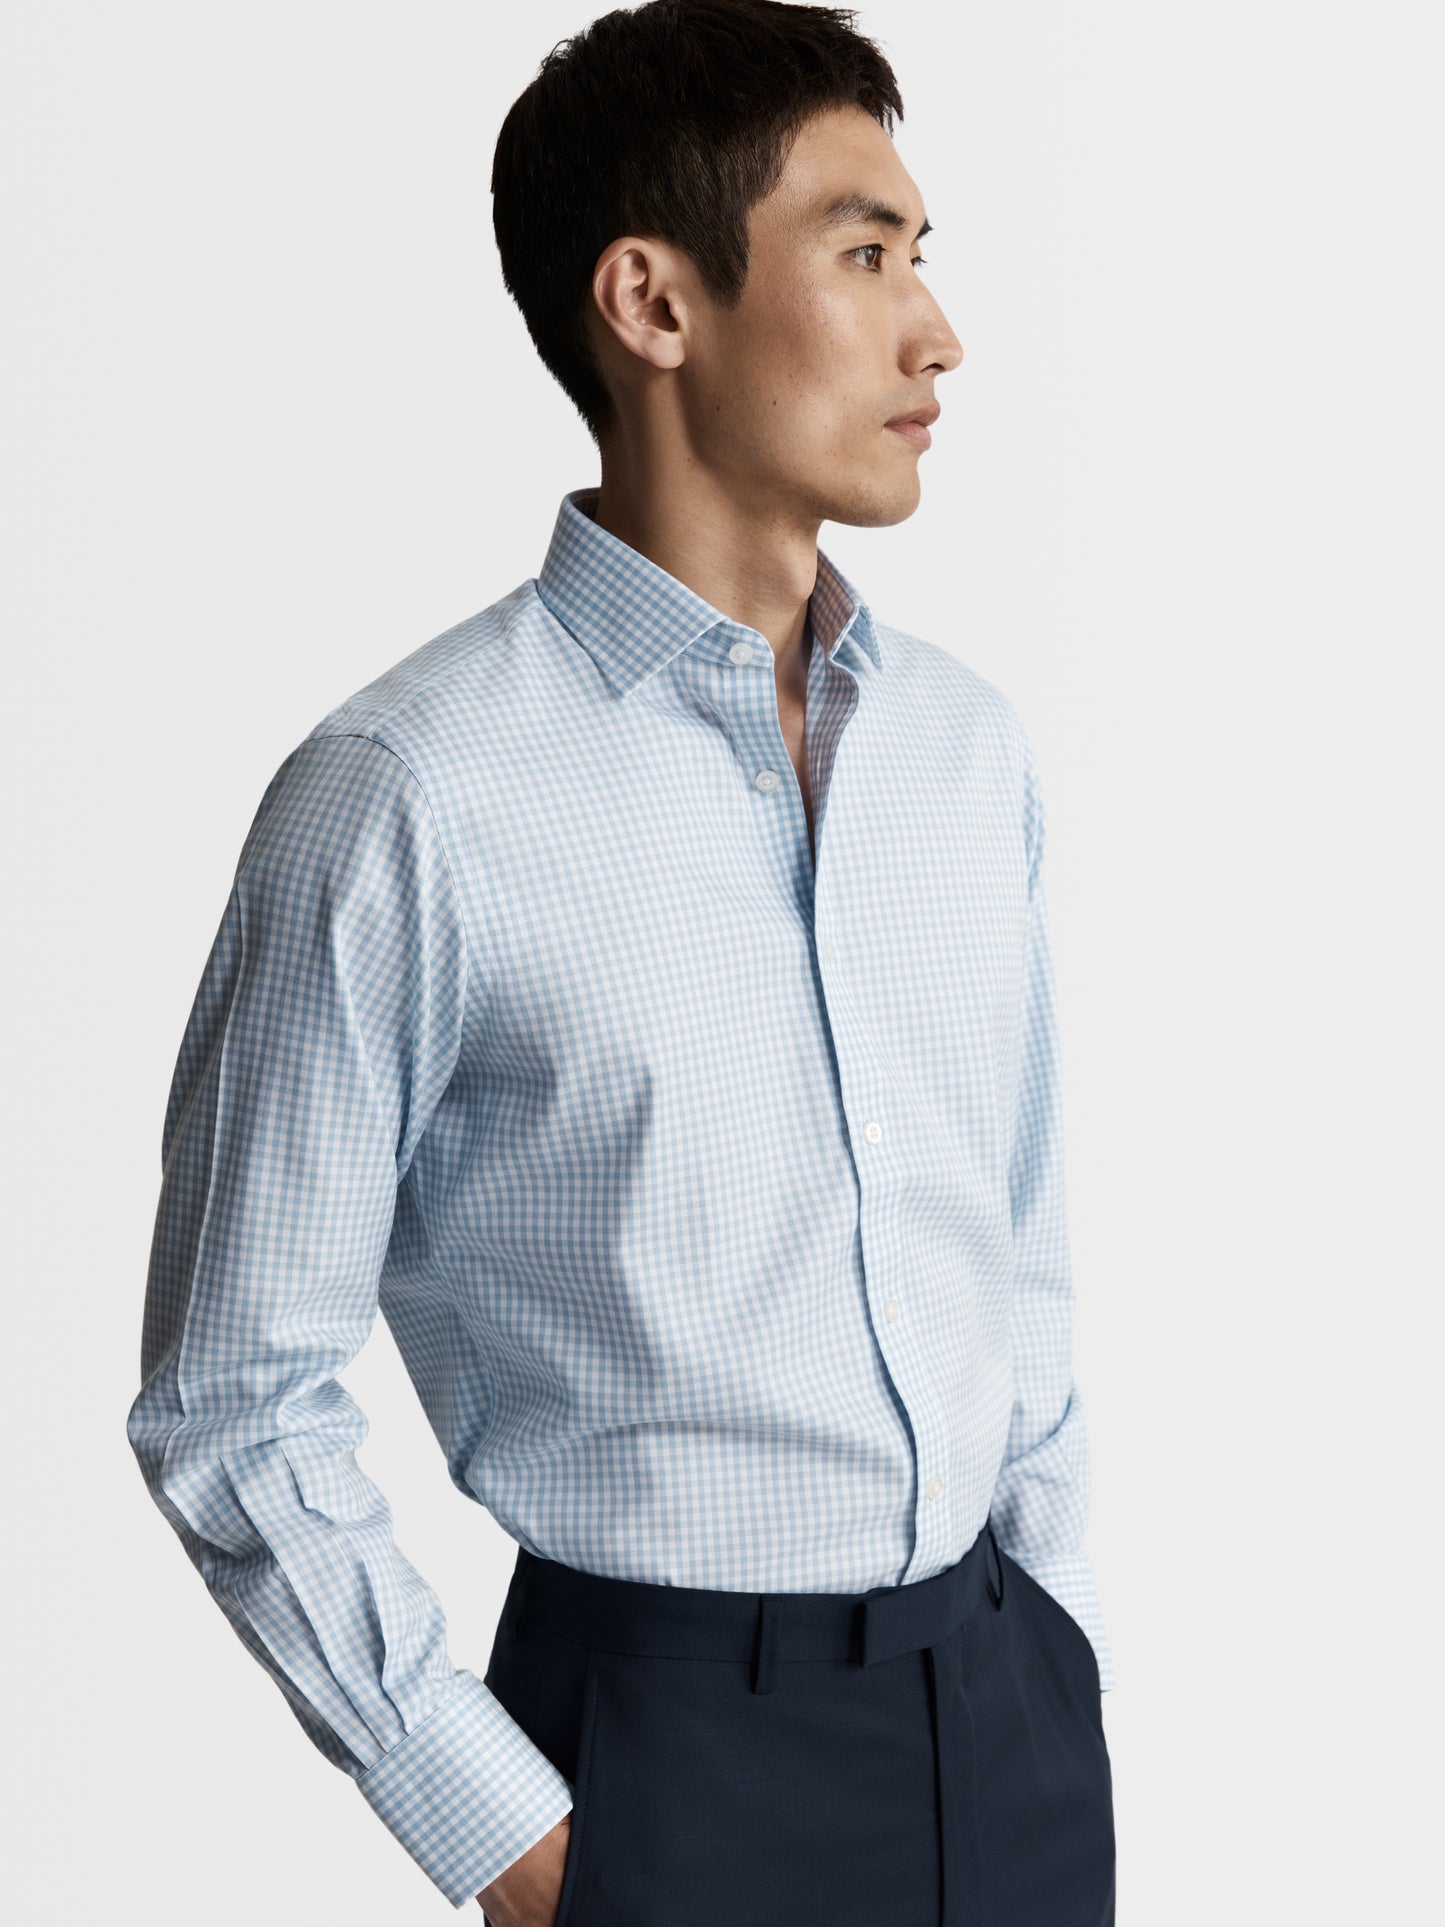 Image 1 of Non-Iron Light Blue Gingham Twill Fitted Single Cuff Classic Collar Shirt